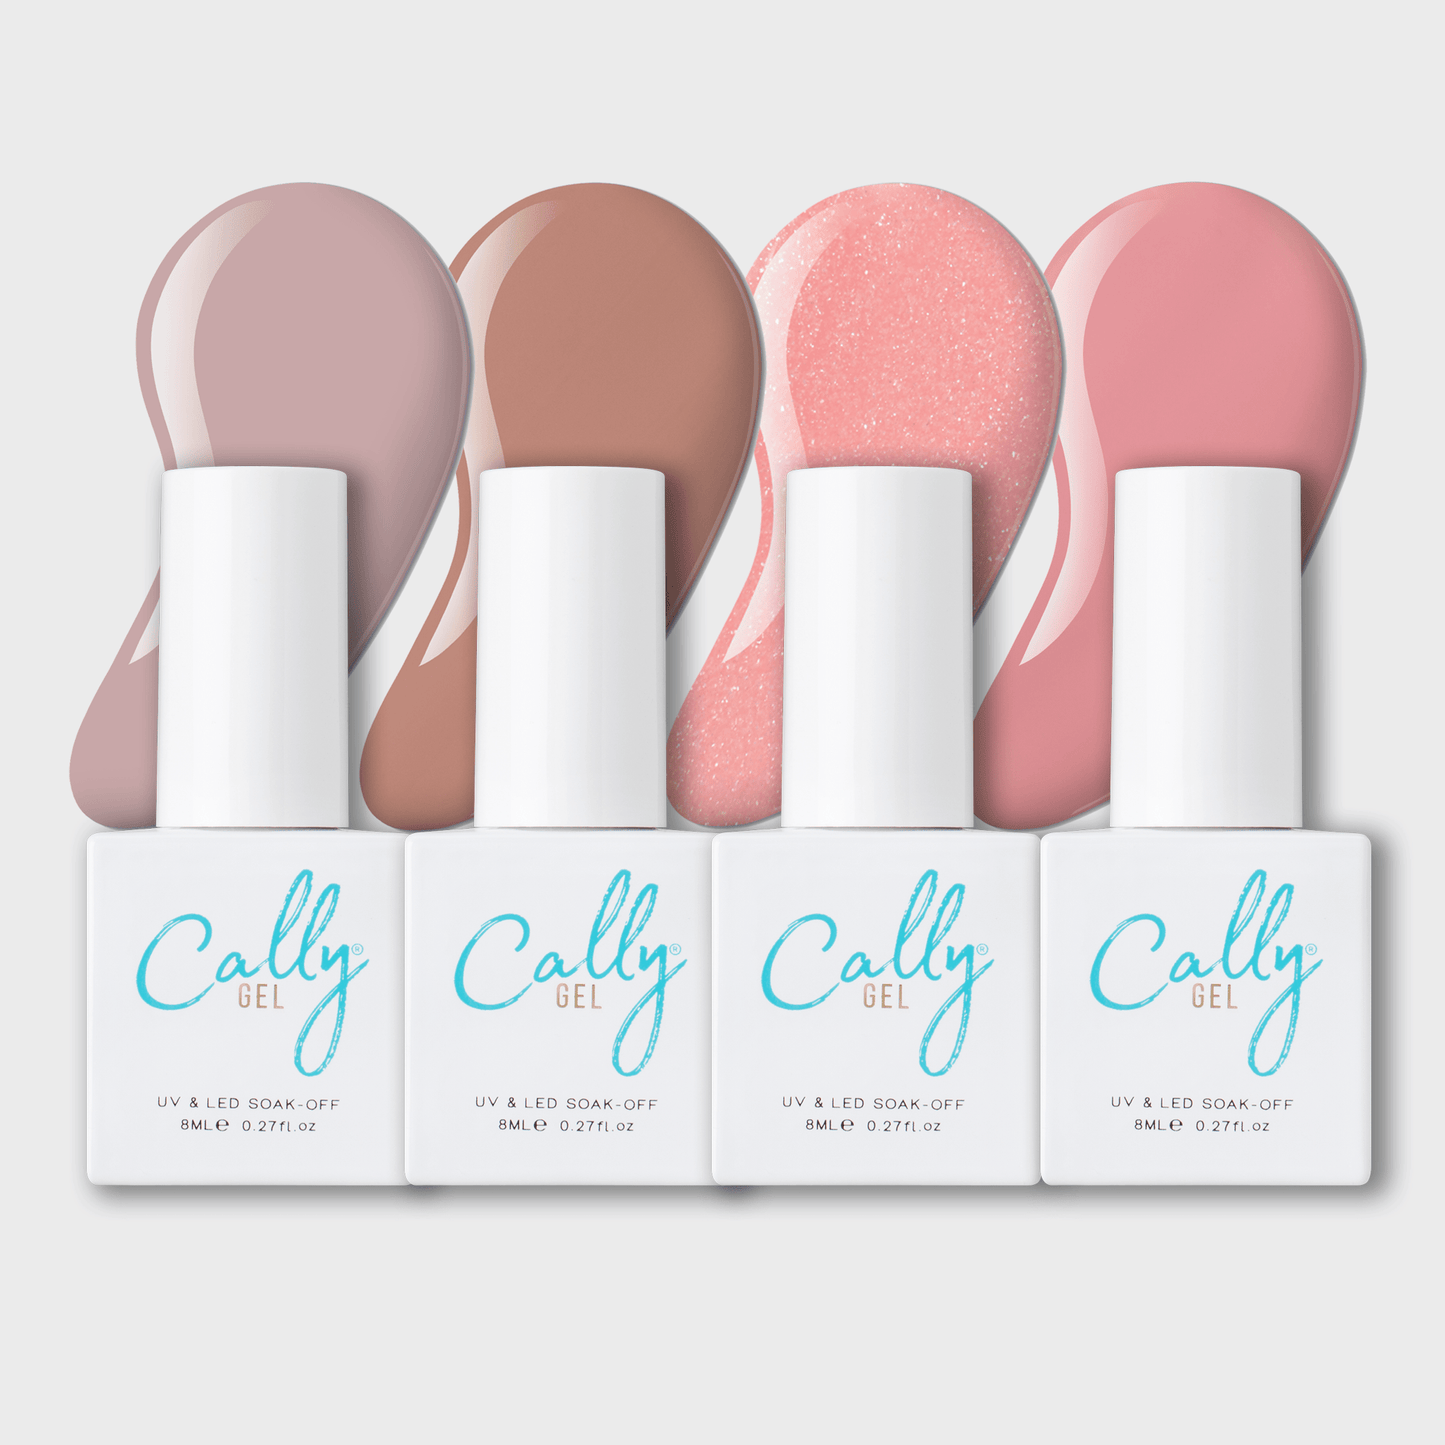 The Cally Gel Pink Kit